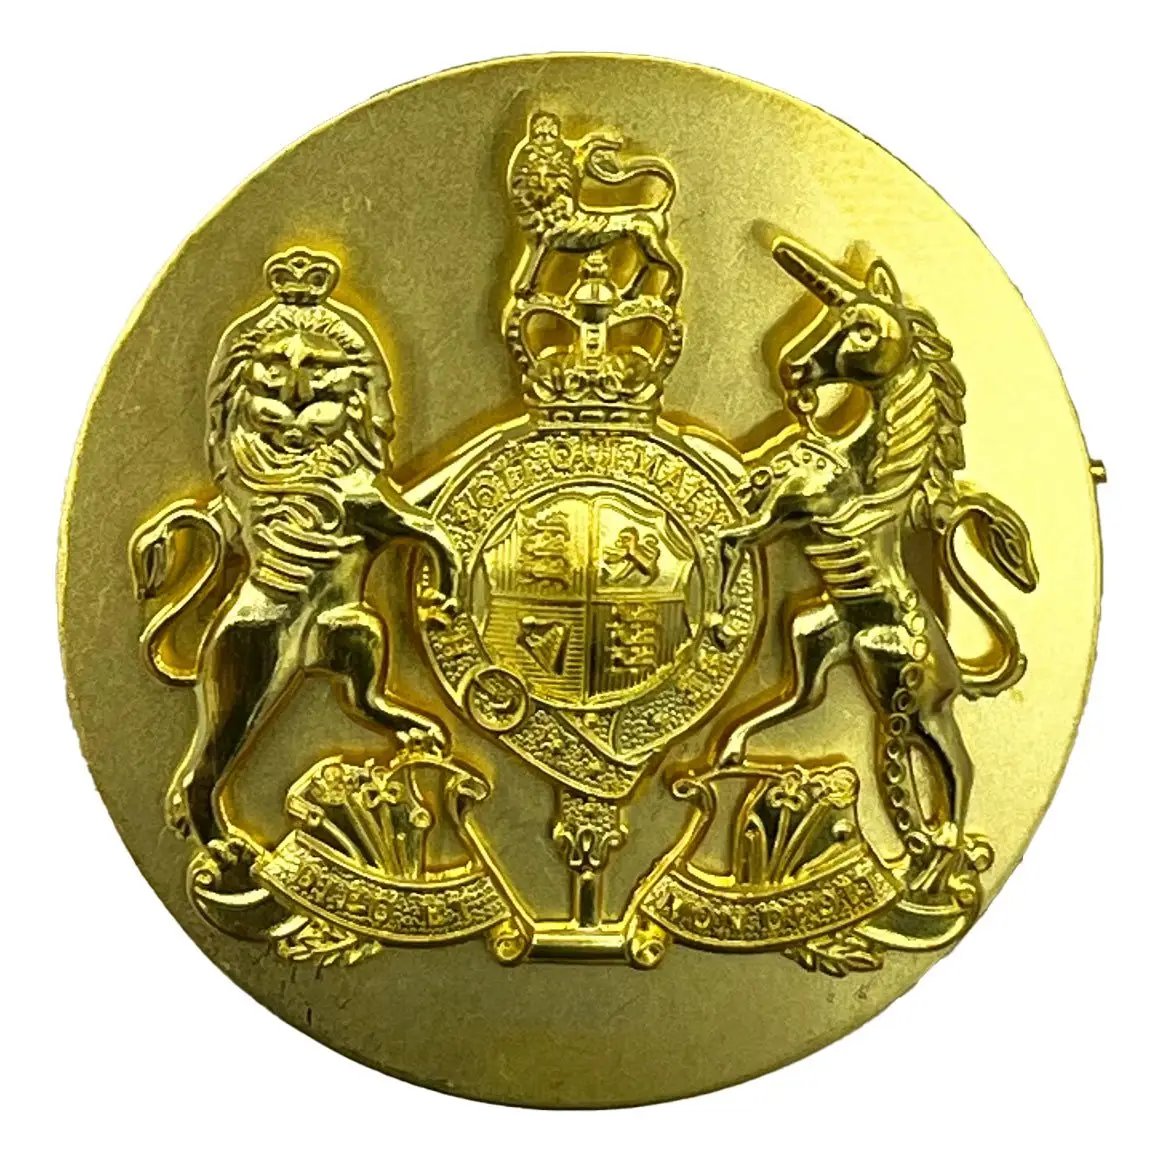 British Army WO1 Royal Arms Brass Badge with Backing Plate - John Bull Clothing